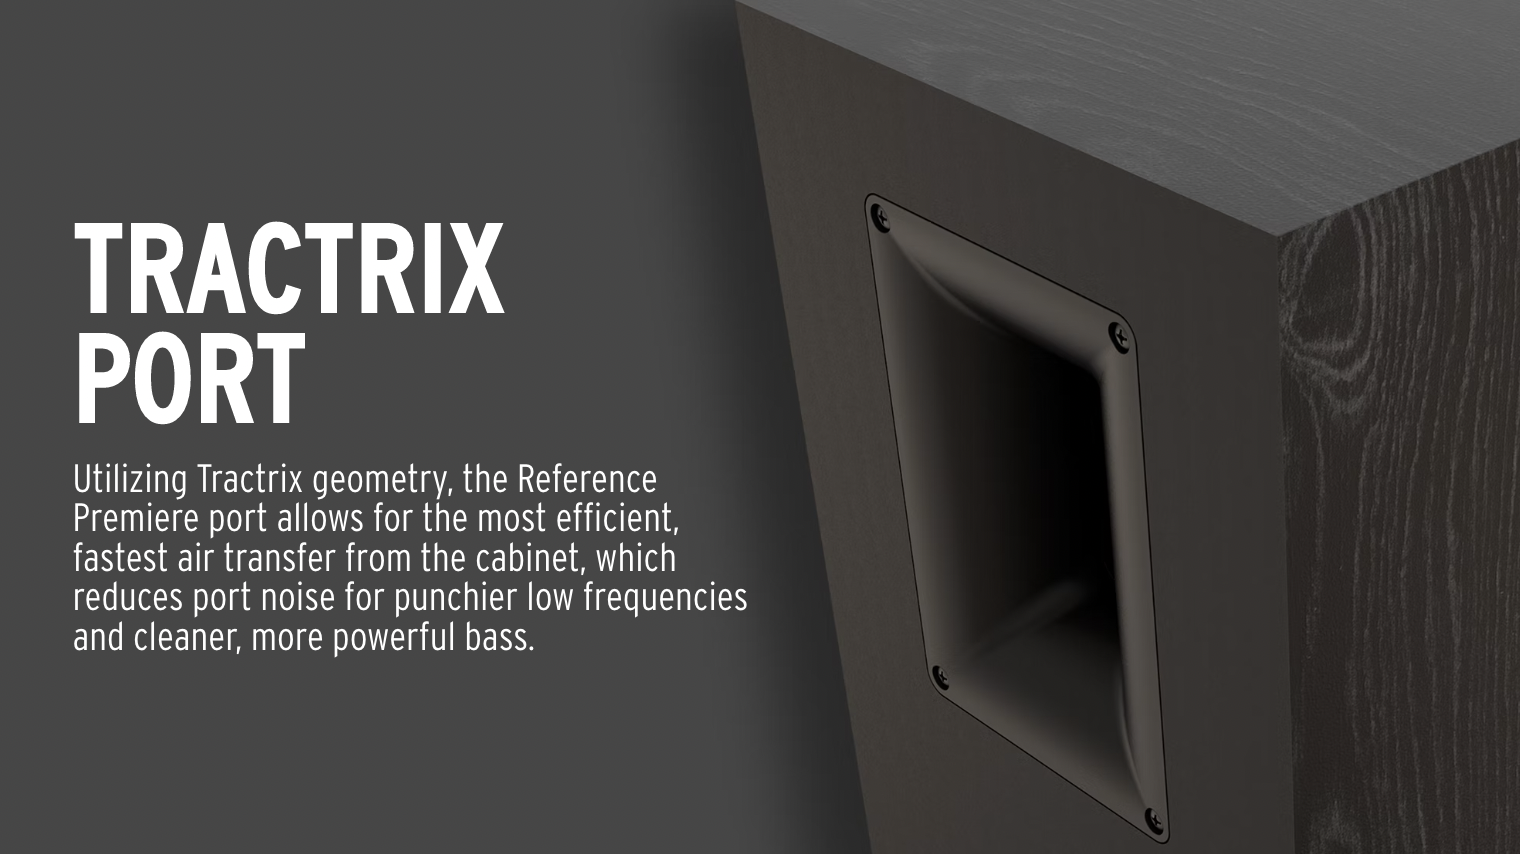 Utilizing Tractrix geometry, the Reference Premiere port allows for the most efficient, fastest air transfer from the cabinet, which reduces port noise for punchier low frequencies and cleaner, more powerful. 